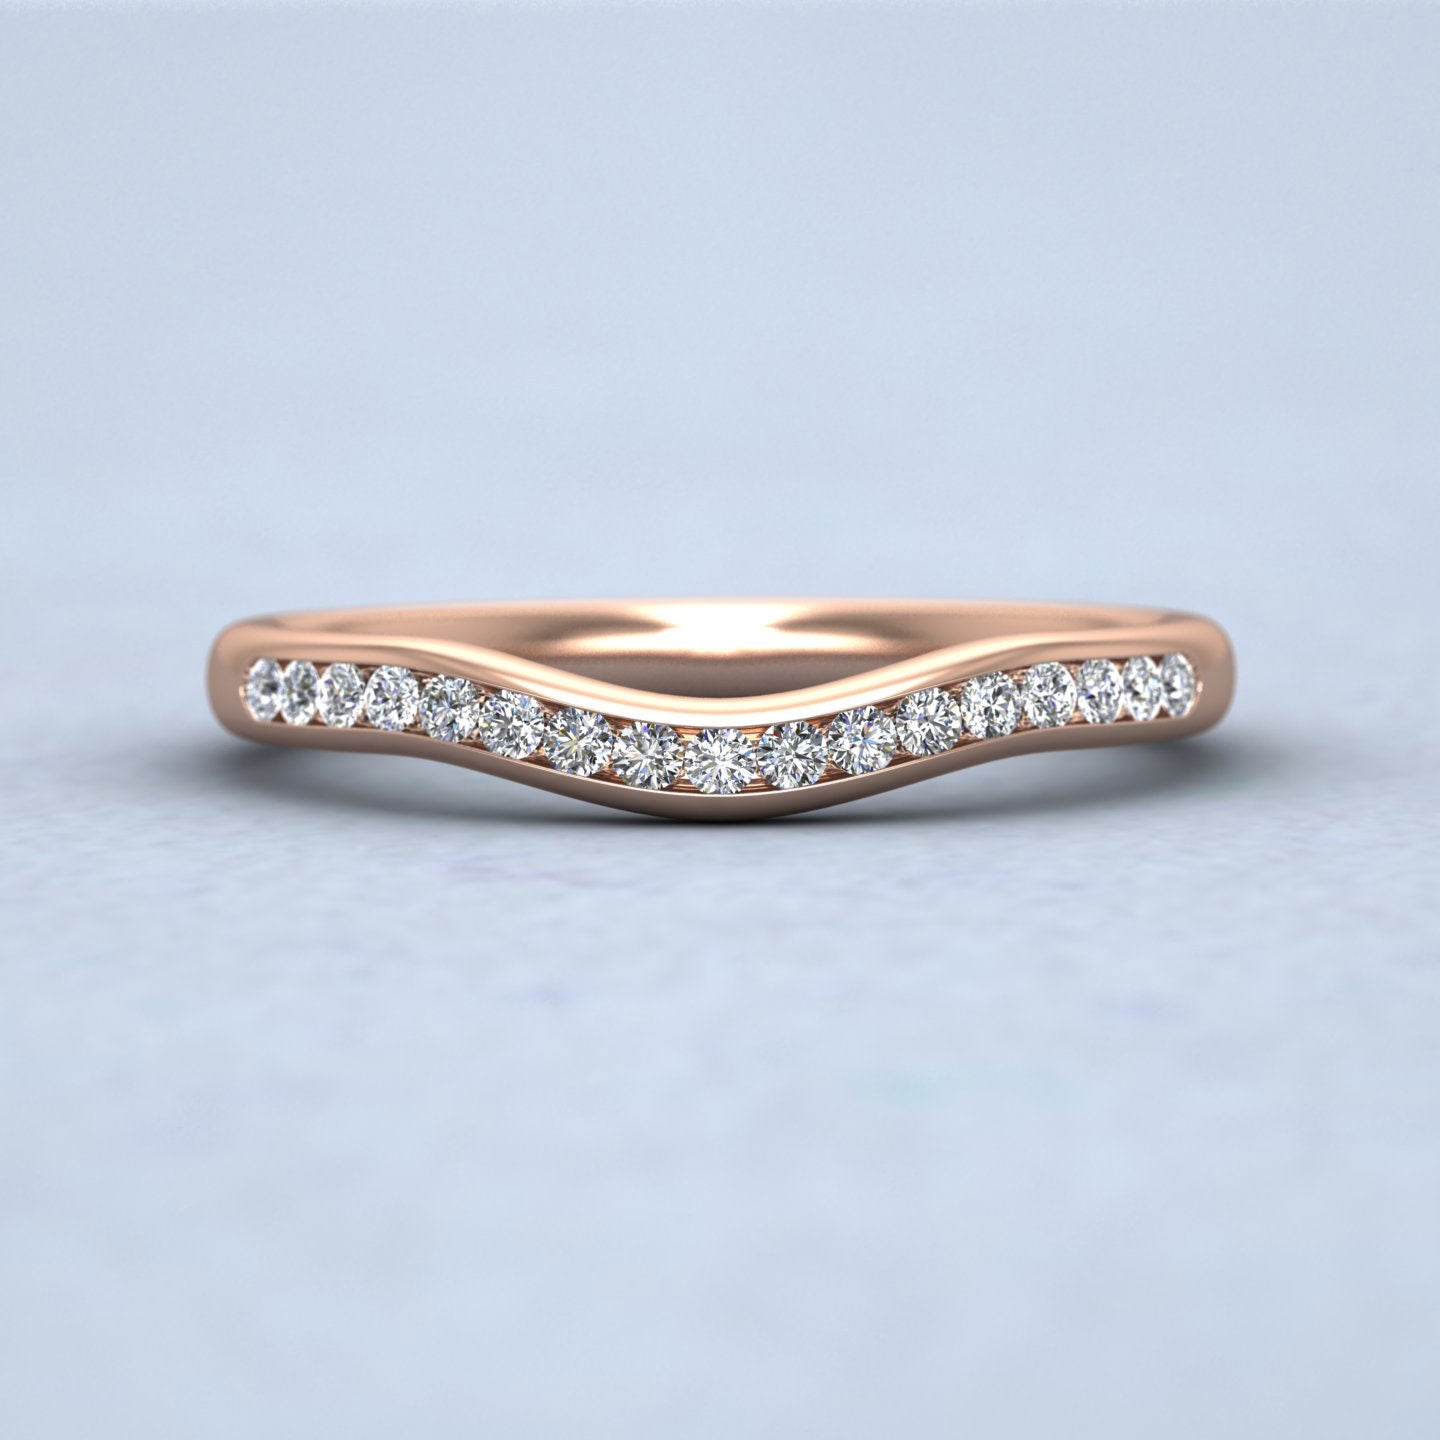 Curved To Fit Channel Set Diamond Wedding Ring In 9ct Rose Gold 2.25mm Wide